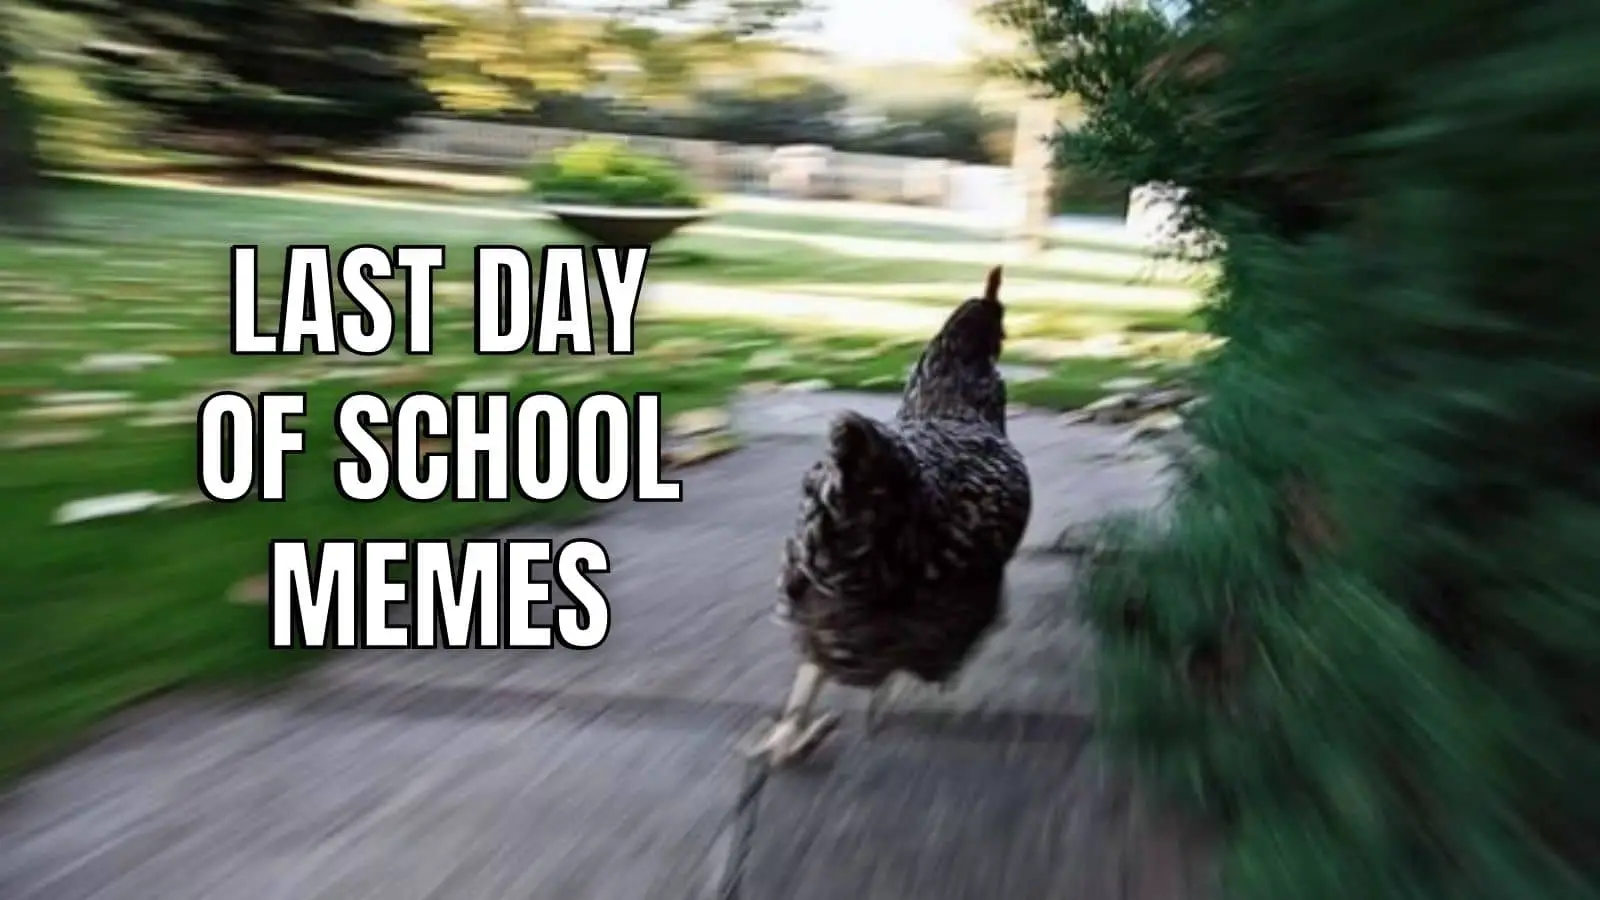 Last Day Of School Memes on Students